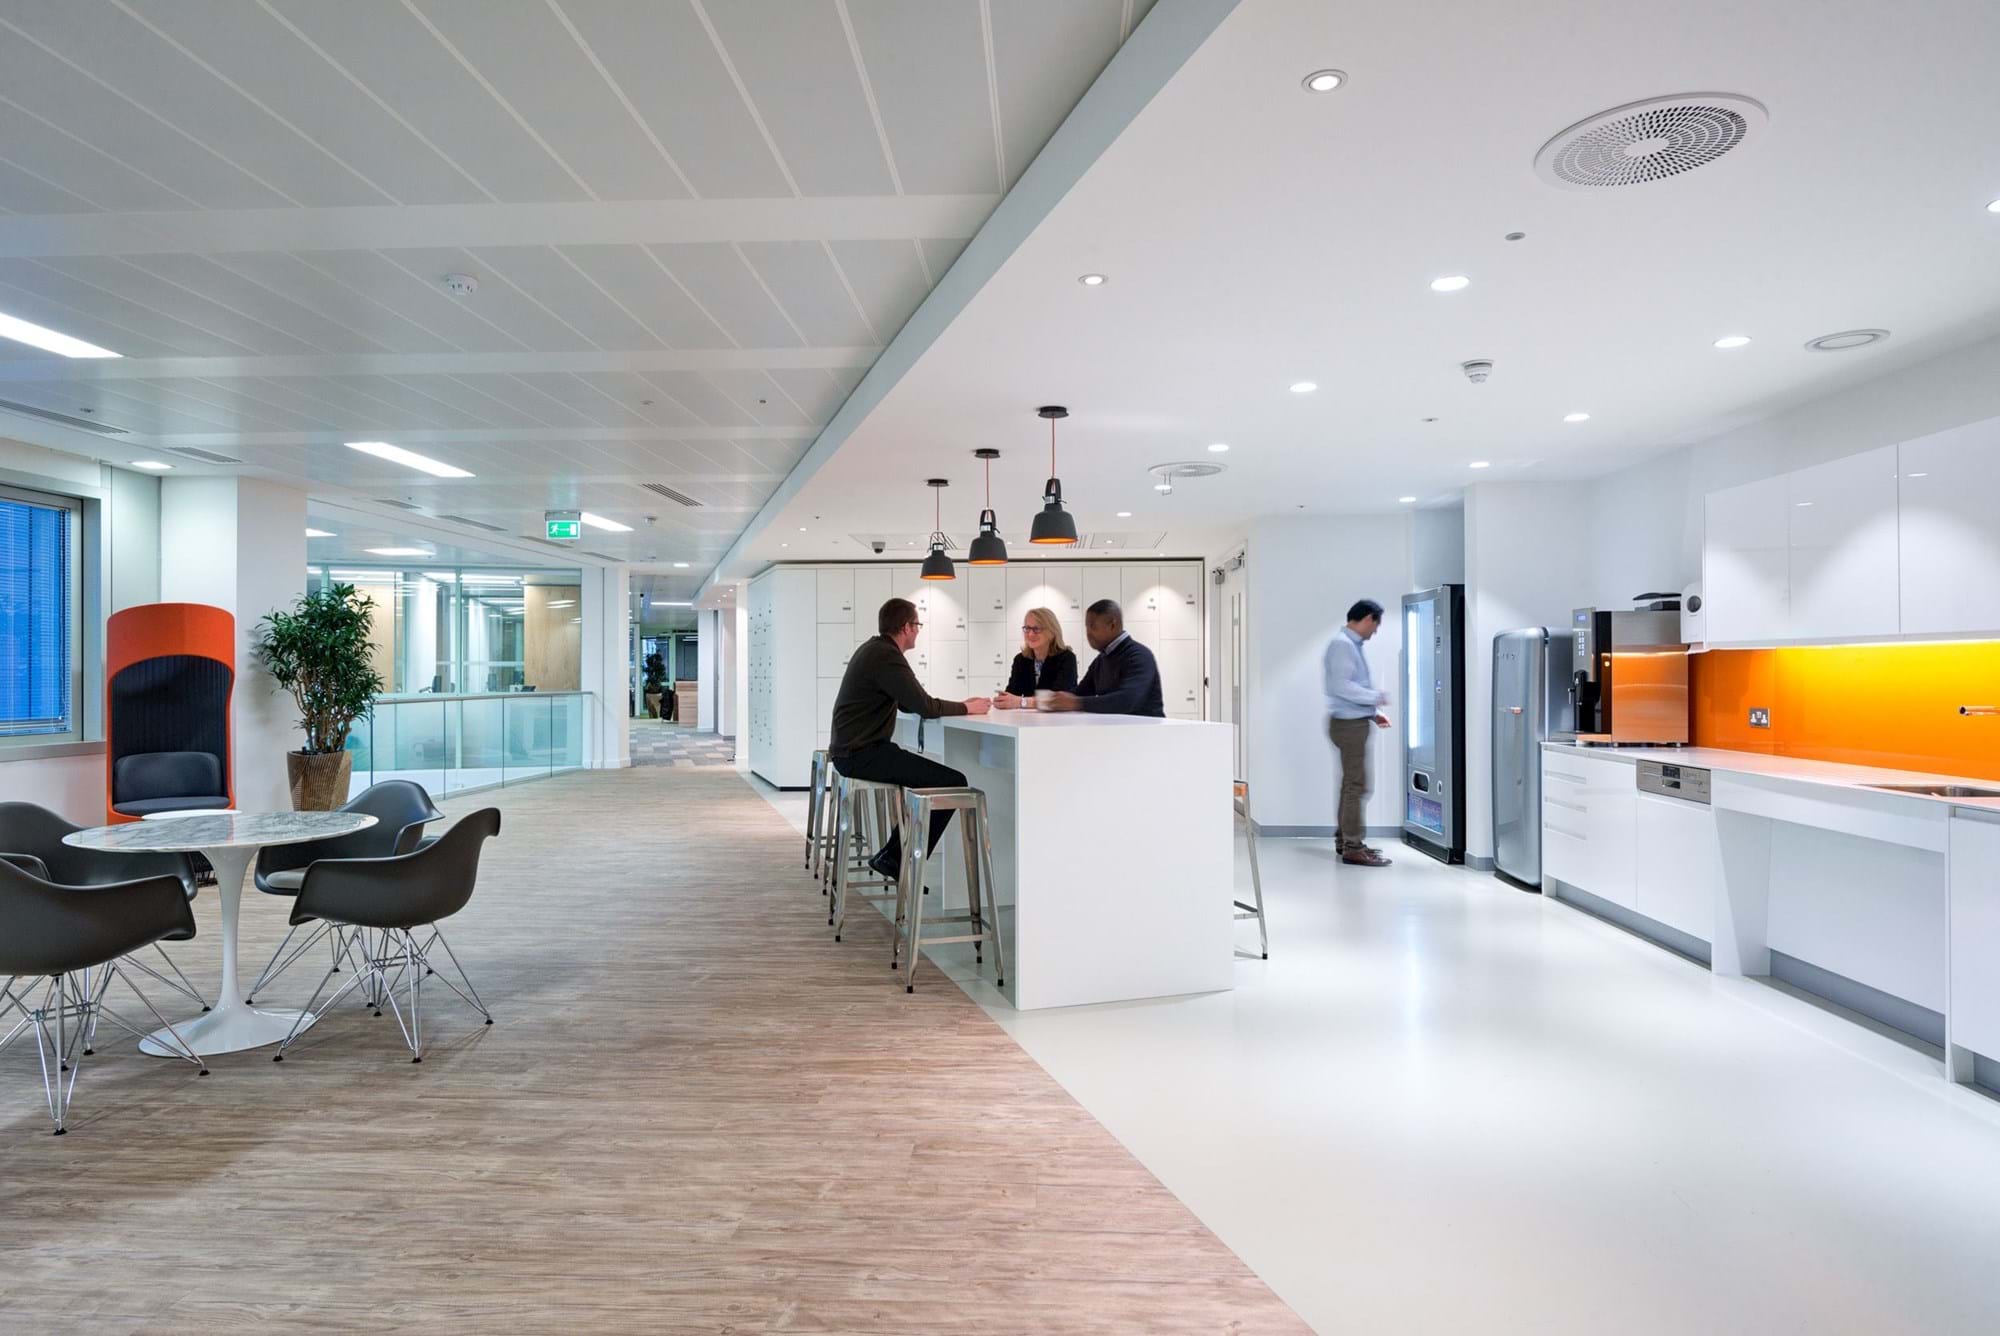 Modus Workspace office design, fit out and refurbishment - Reed Elsevier - Teapoint - Reed Elsevier 09 darker highres sRGB.jpg